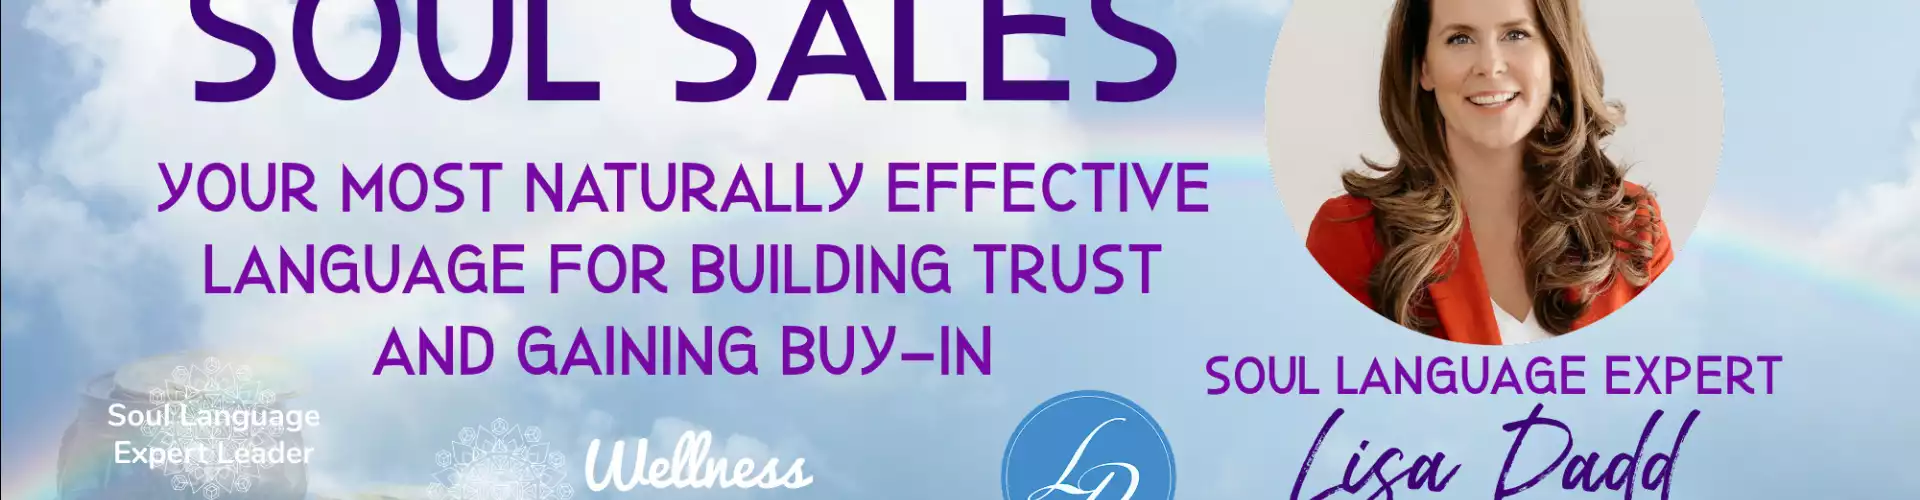 Soul Sales Course with Lisa Dadd